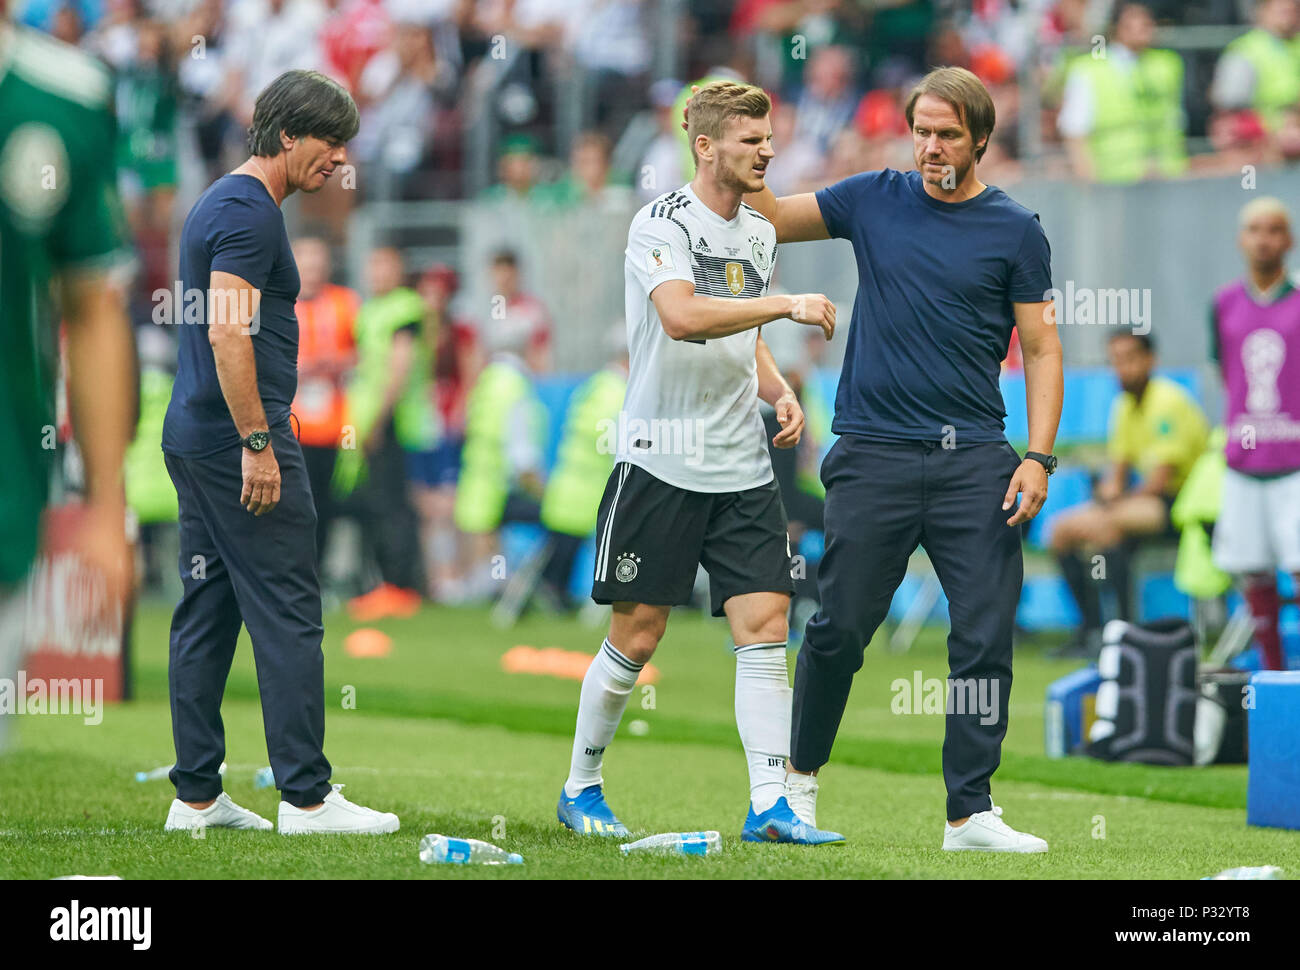 Moscow, Russia, 17 June 2018. Germany - Mexico, Soccer, Moscow, June 17, 2018 Timo WERNER, DFB 9 verletzt,  DFB headcoach Joachim Jogi LOEW, LÖW,Thomas SCHNEIDER, DFB Co-Trainer, Assistentcoach GERMANY - MEXICO FIFA WORLD CUP 2018 RUSSIA, Group F, Season 2018/2019,  June 17, 2018 L u z h n i k i Stadium in Moscow, Russia.  © Peter Schatz / Alamy Live News Stock Photo